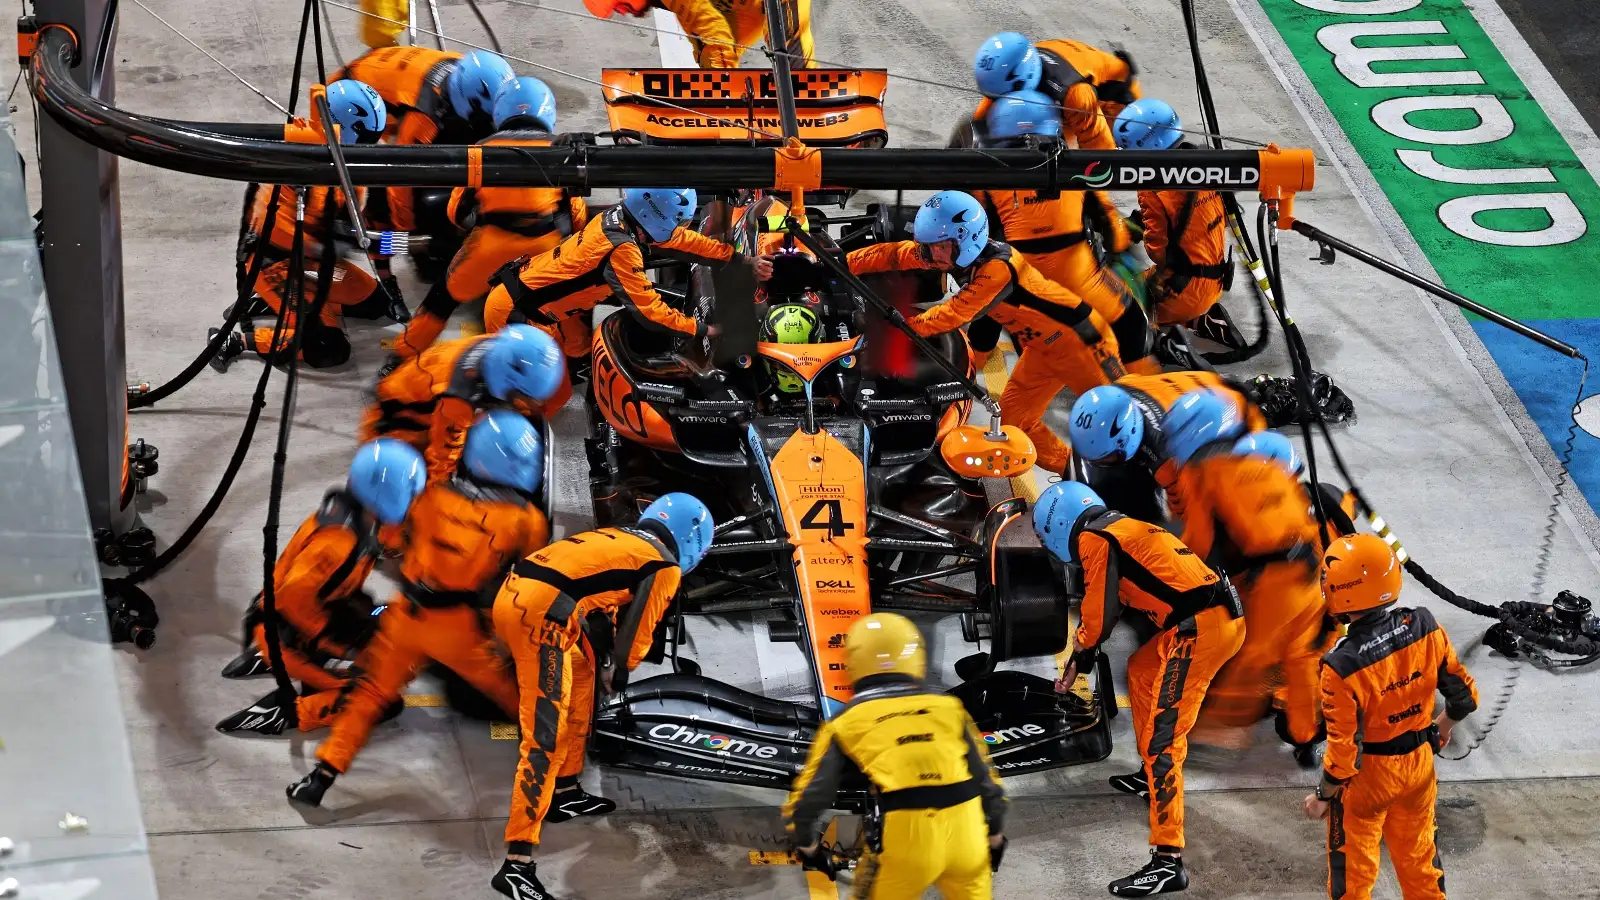 McLaren and their pit crew